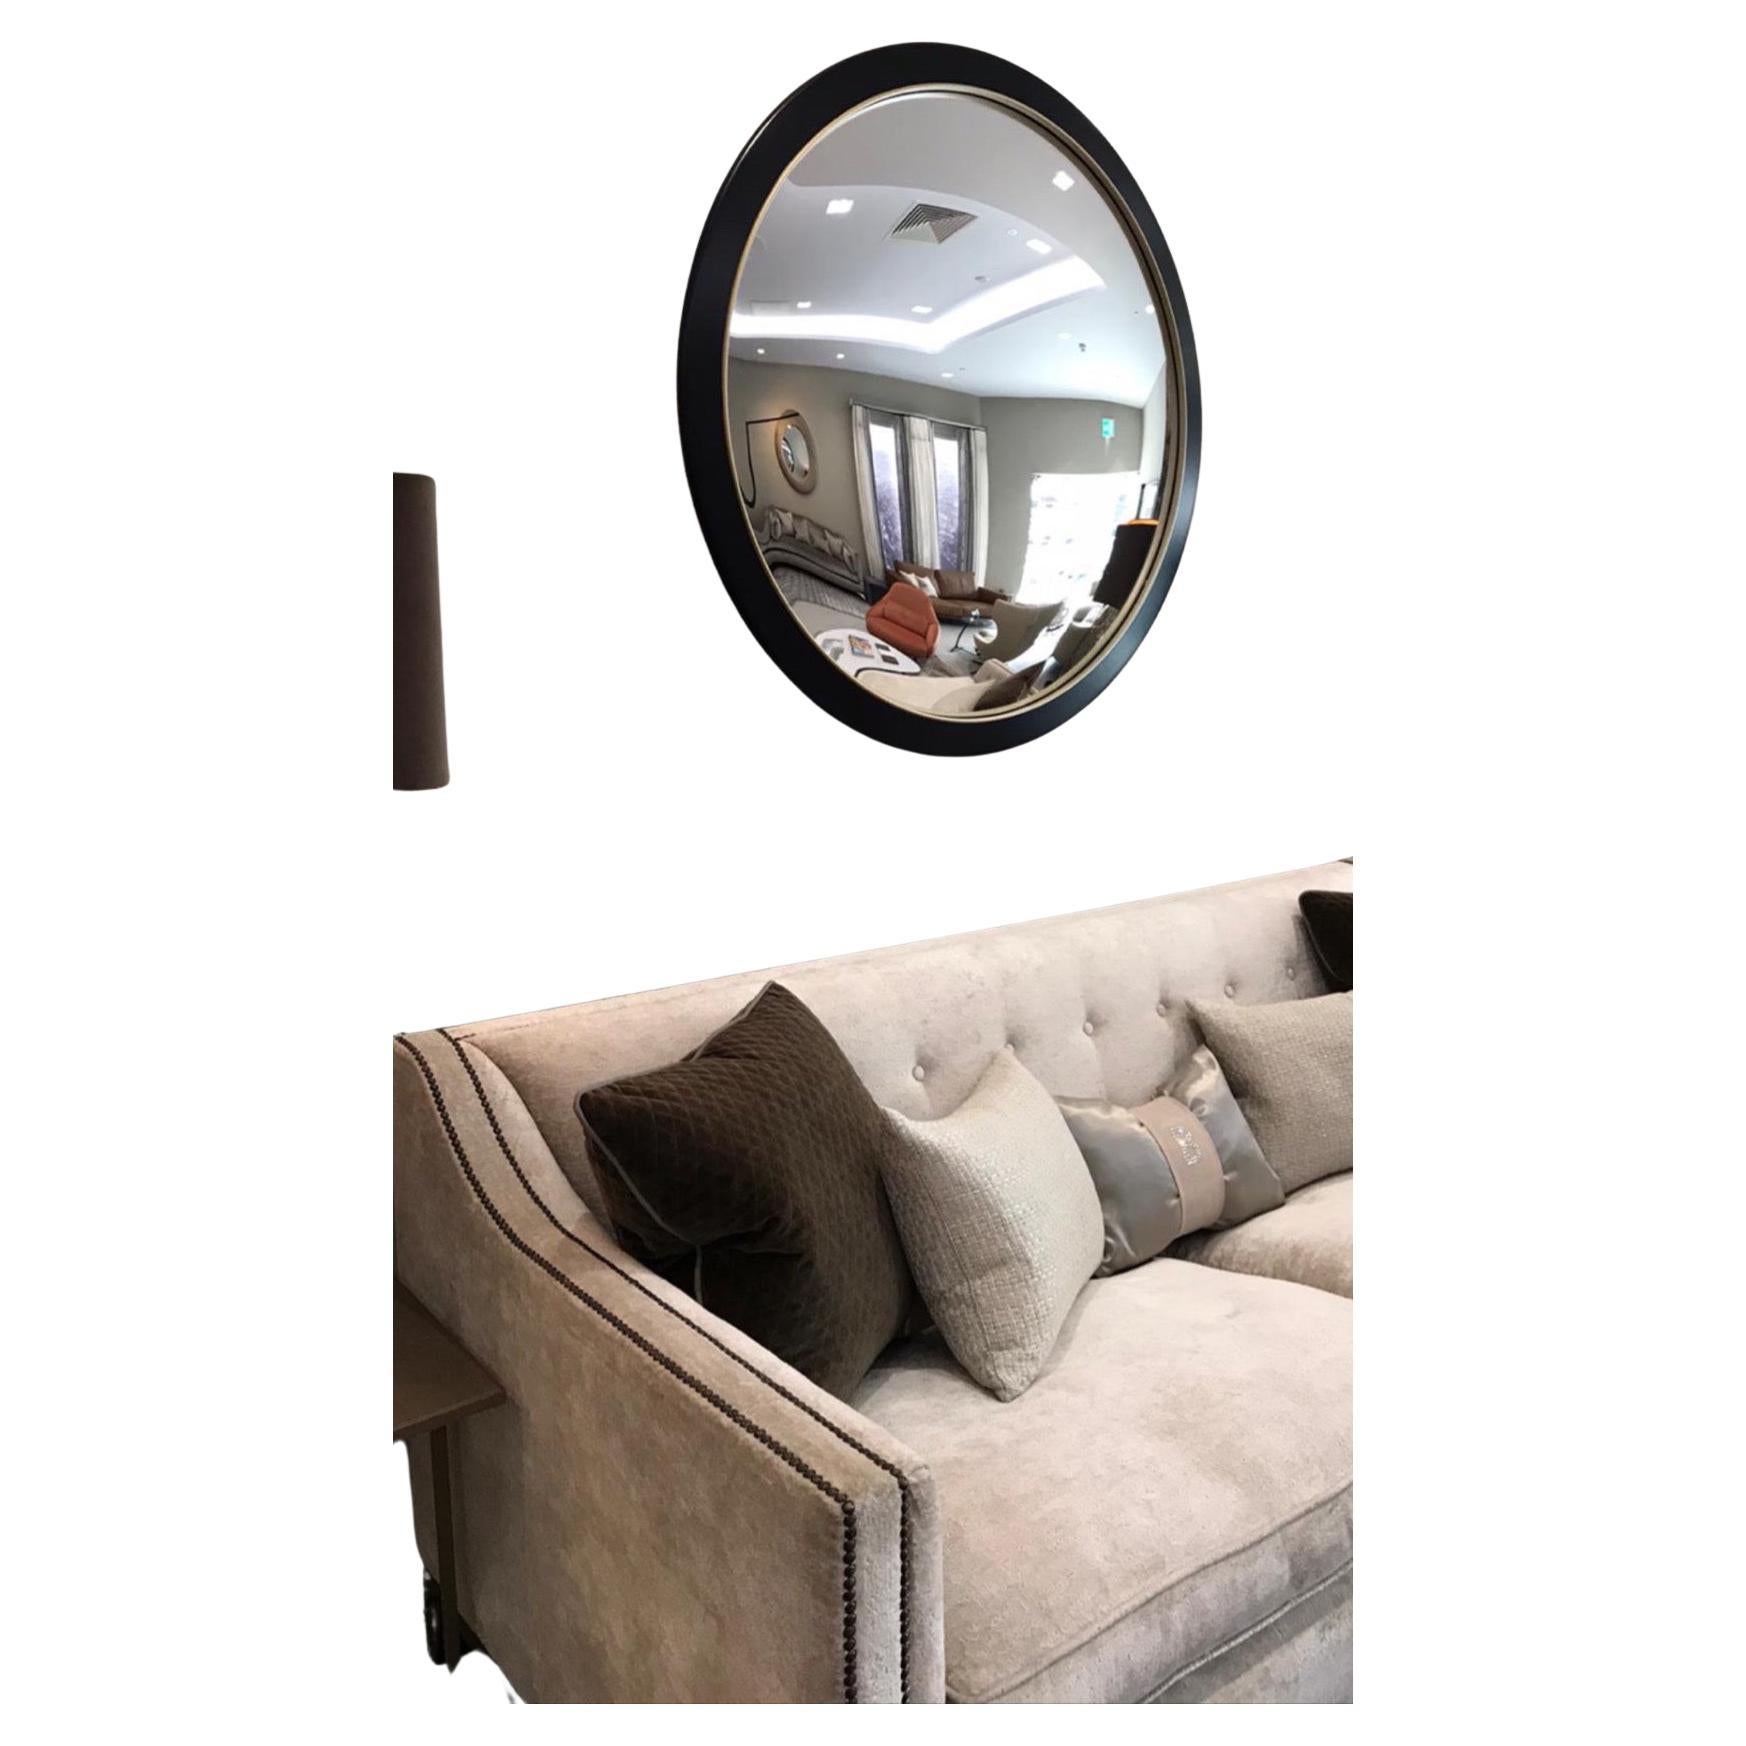 The Stilo Nero is a highly decorative convex wall mirror that creates a focal point and adds elegance to any room. The mirror itself is silvered using traditional methods and fabricated from 6mm low iron glass with a curvature of 7 cms. The overall